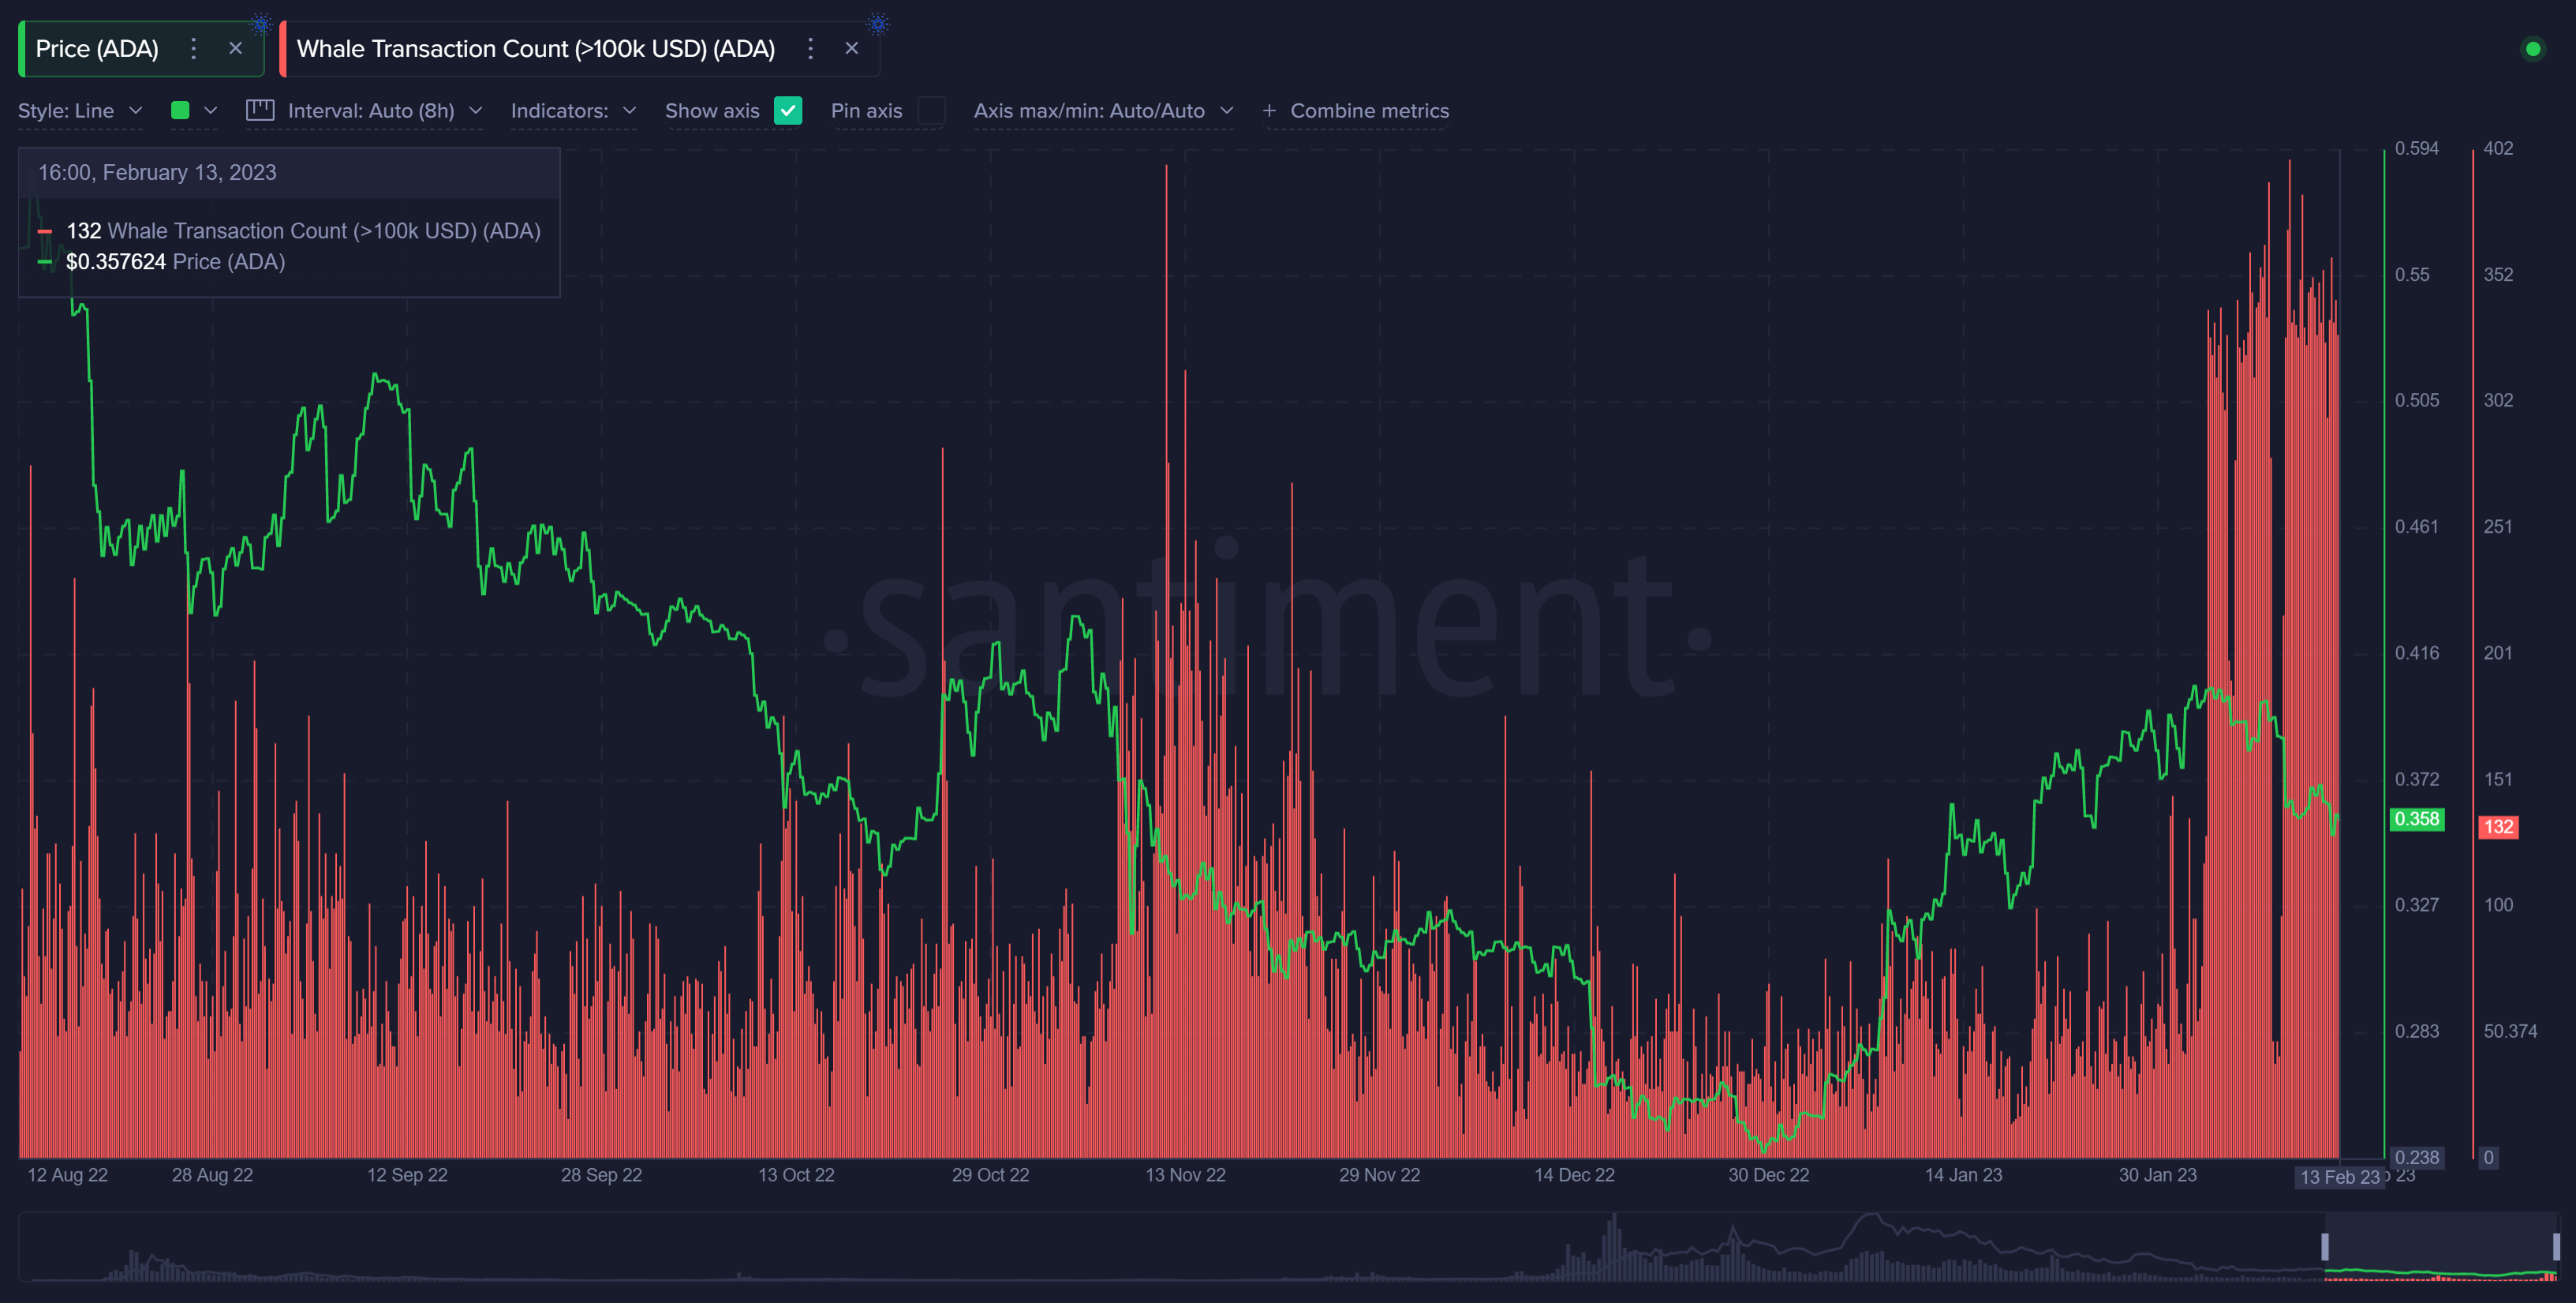 Cardano whale activity is spiking